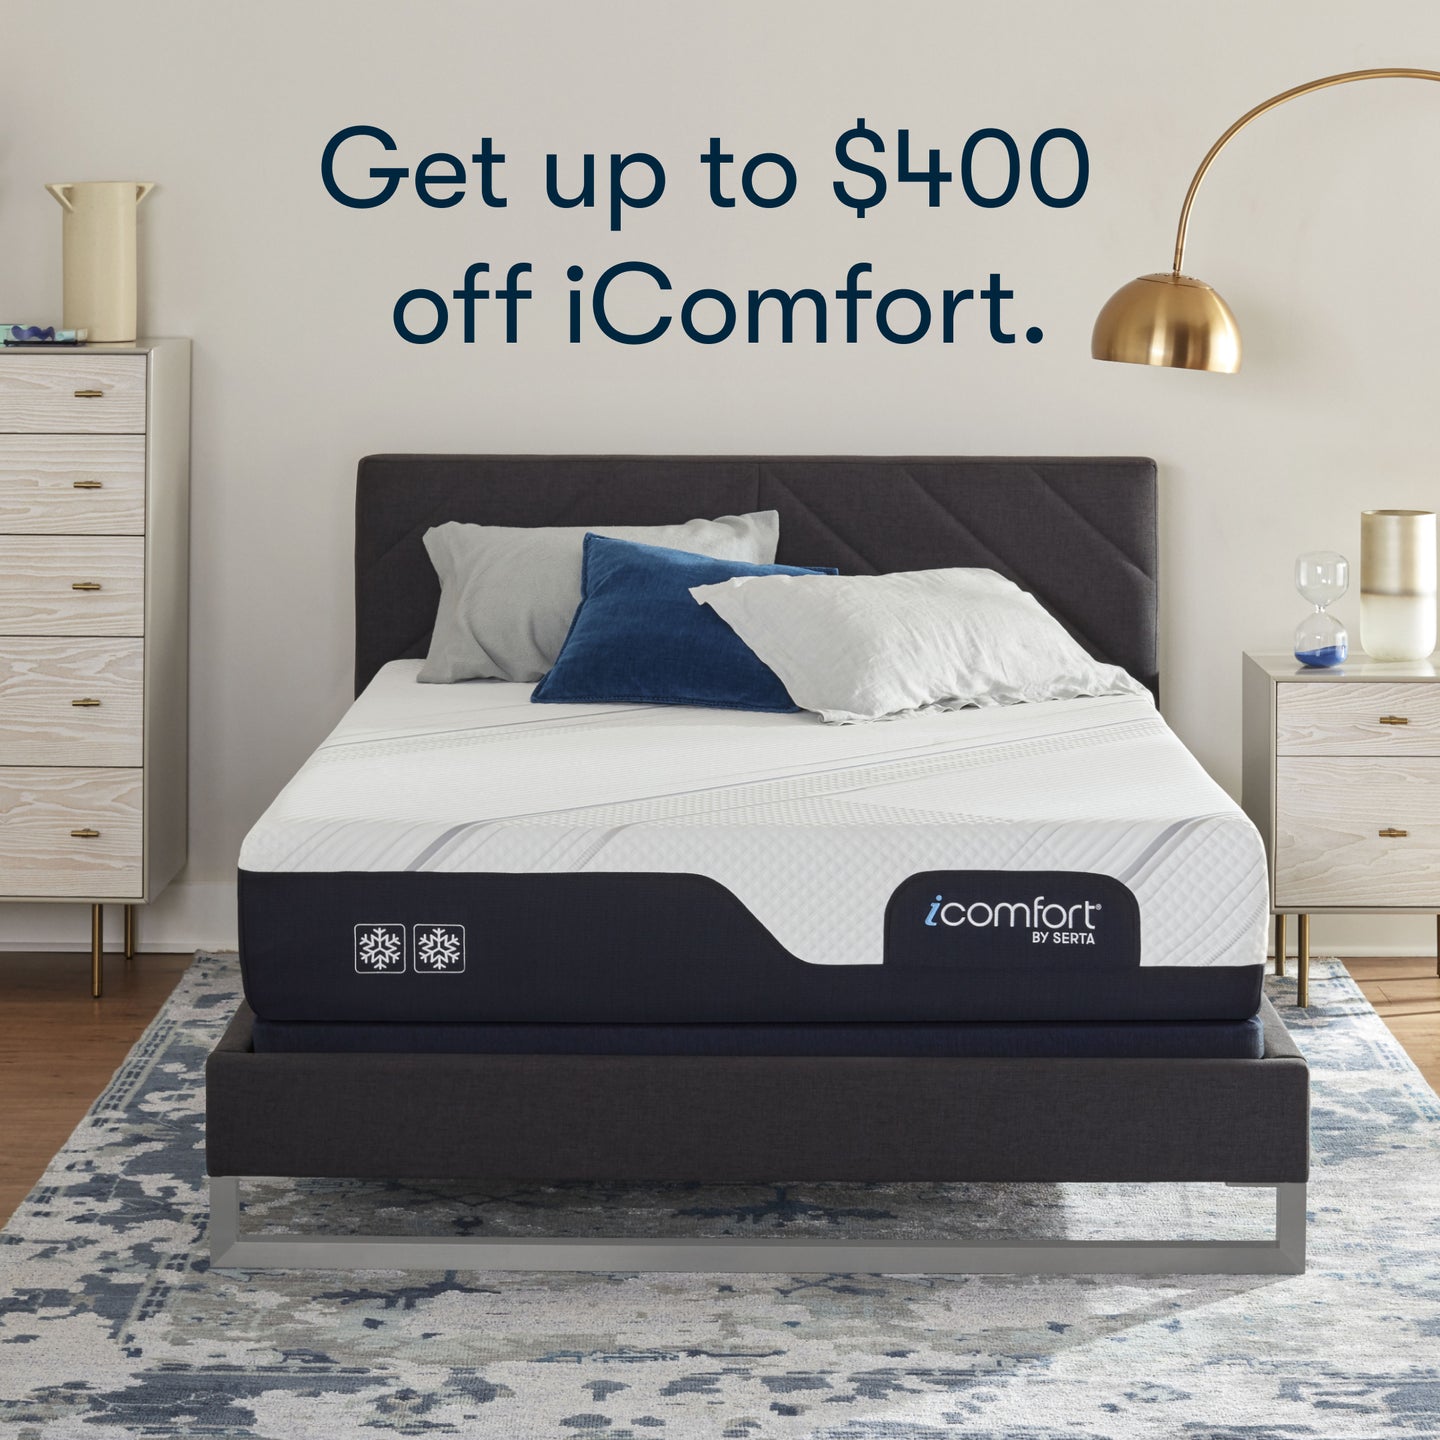 Save up to $400 during the iComfort Savings Event.